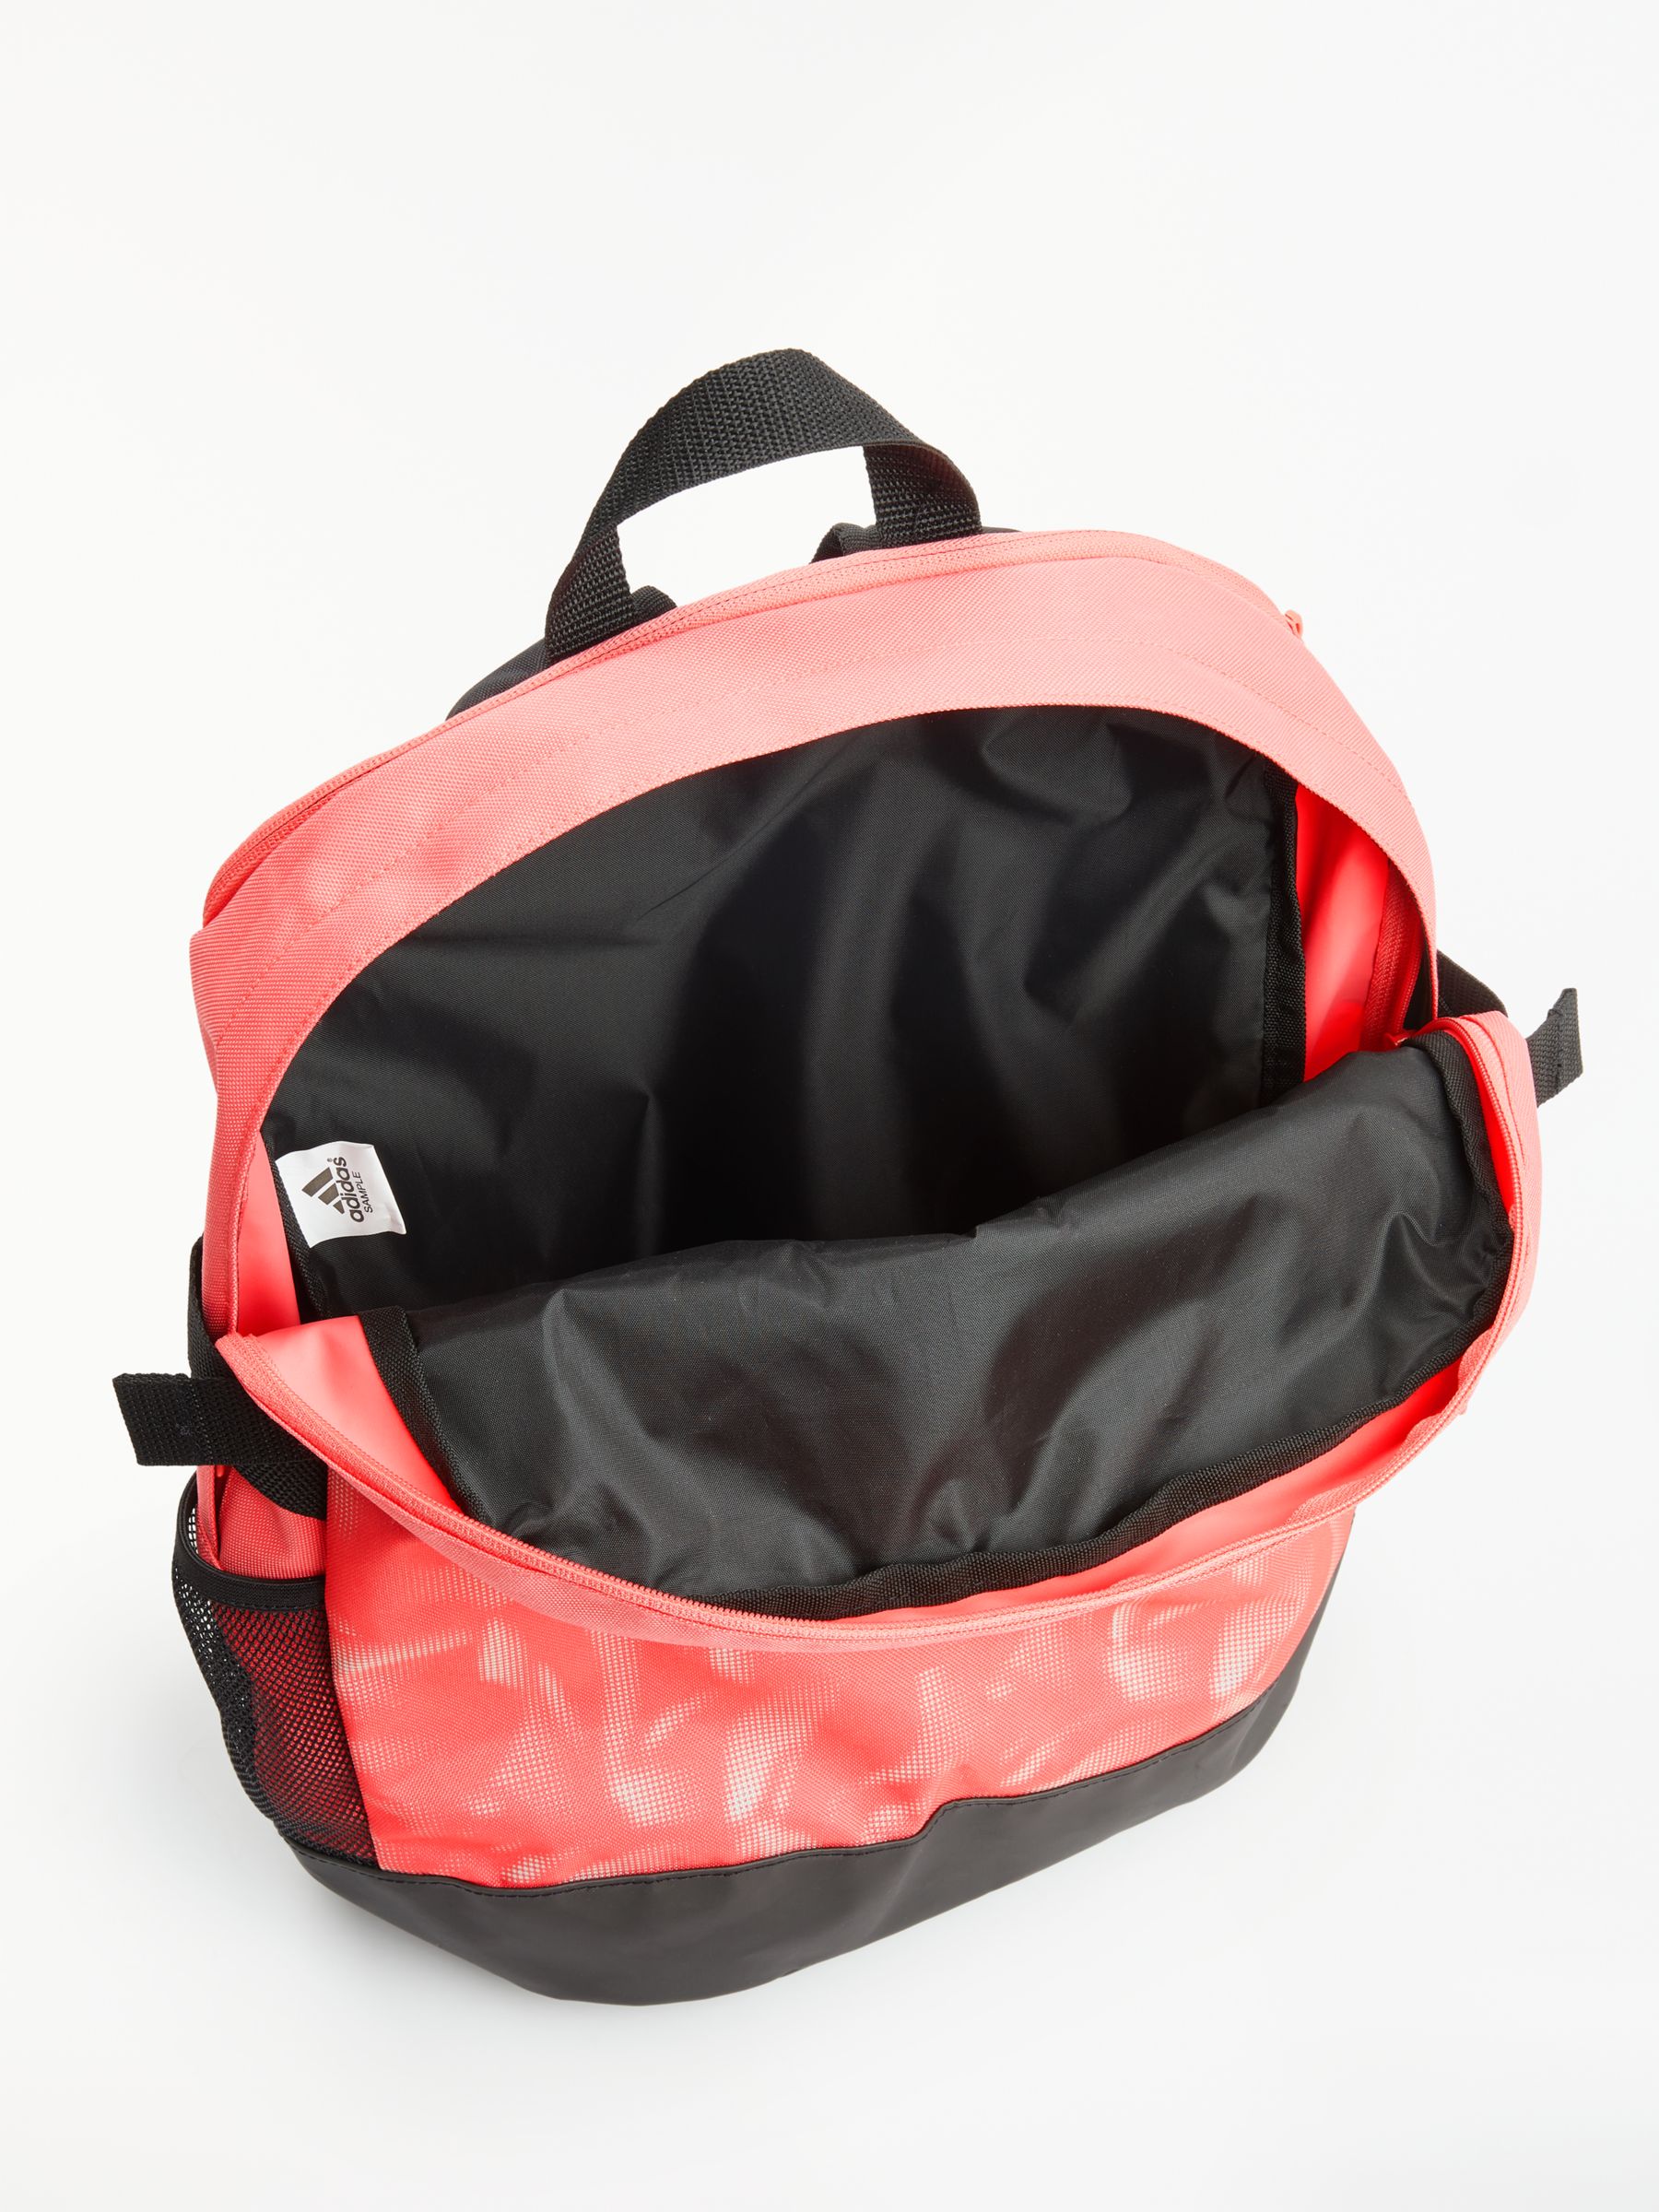 adidas graphic backpack pink